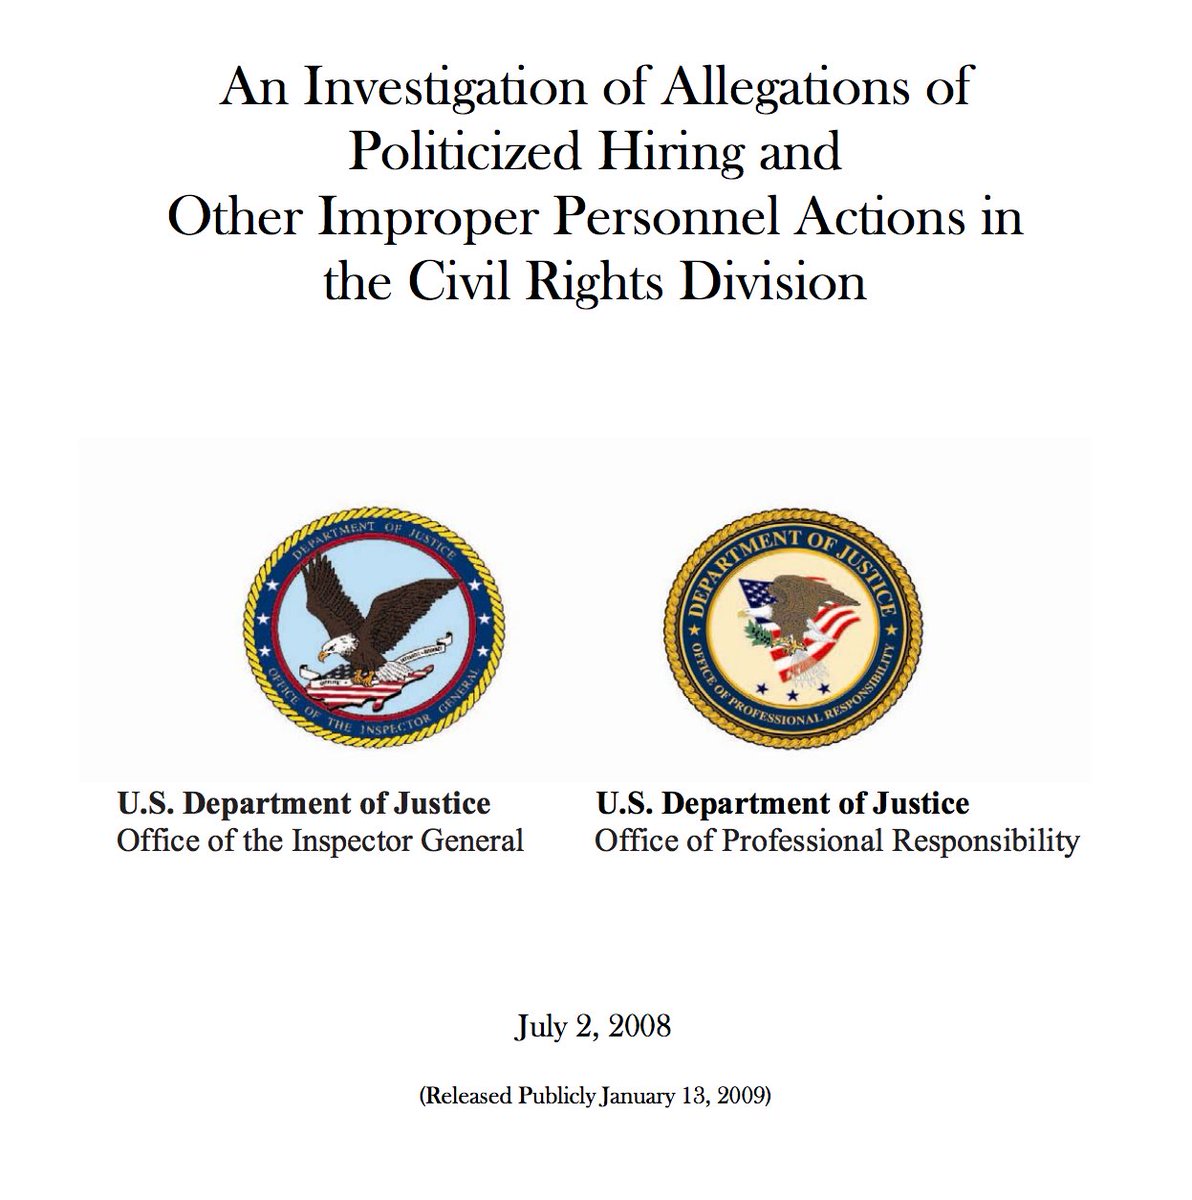 27/ In 2008, a joint investigation by the Office of the Inspector General and the Office of Professional Responsibility found that from 2002–2006, politically appointed DOJ officials purposefully "considered political or ideological affiliations when deselecting candidates"...